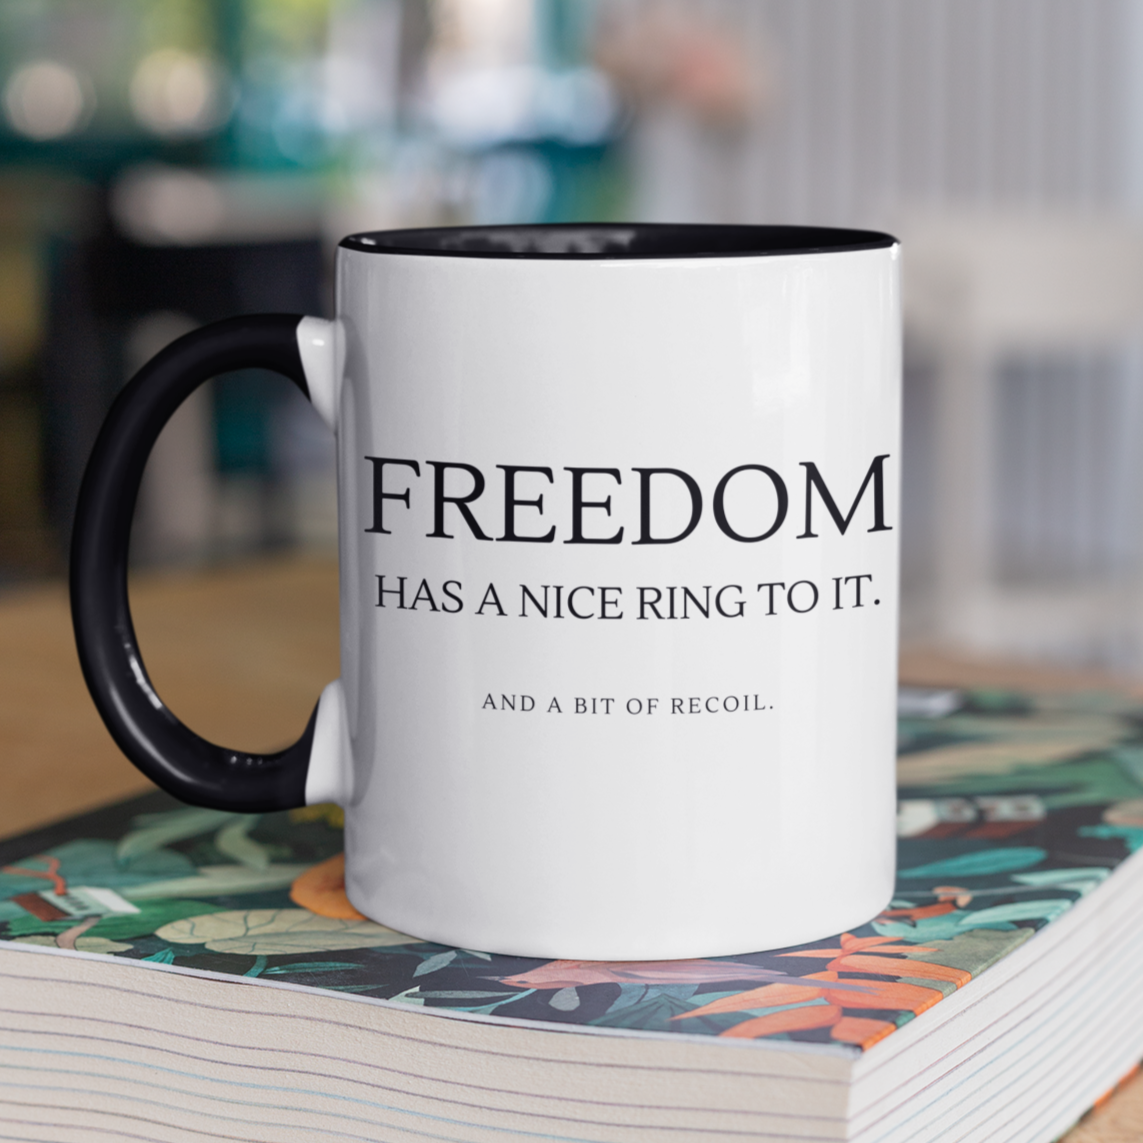 freedom-has-a-nice-ring-to-it-and-a-bit-of-recoil-glossy-mug-11-oz-2a-mockup-of-a-two-toned-coffee-mug-mockup-on-a-table